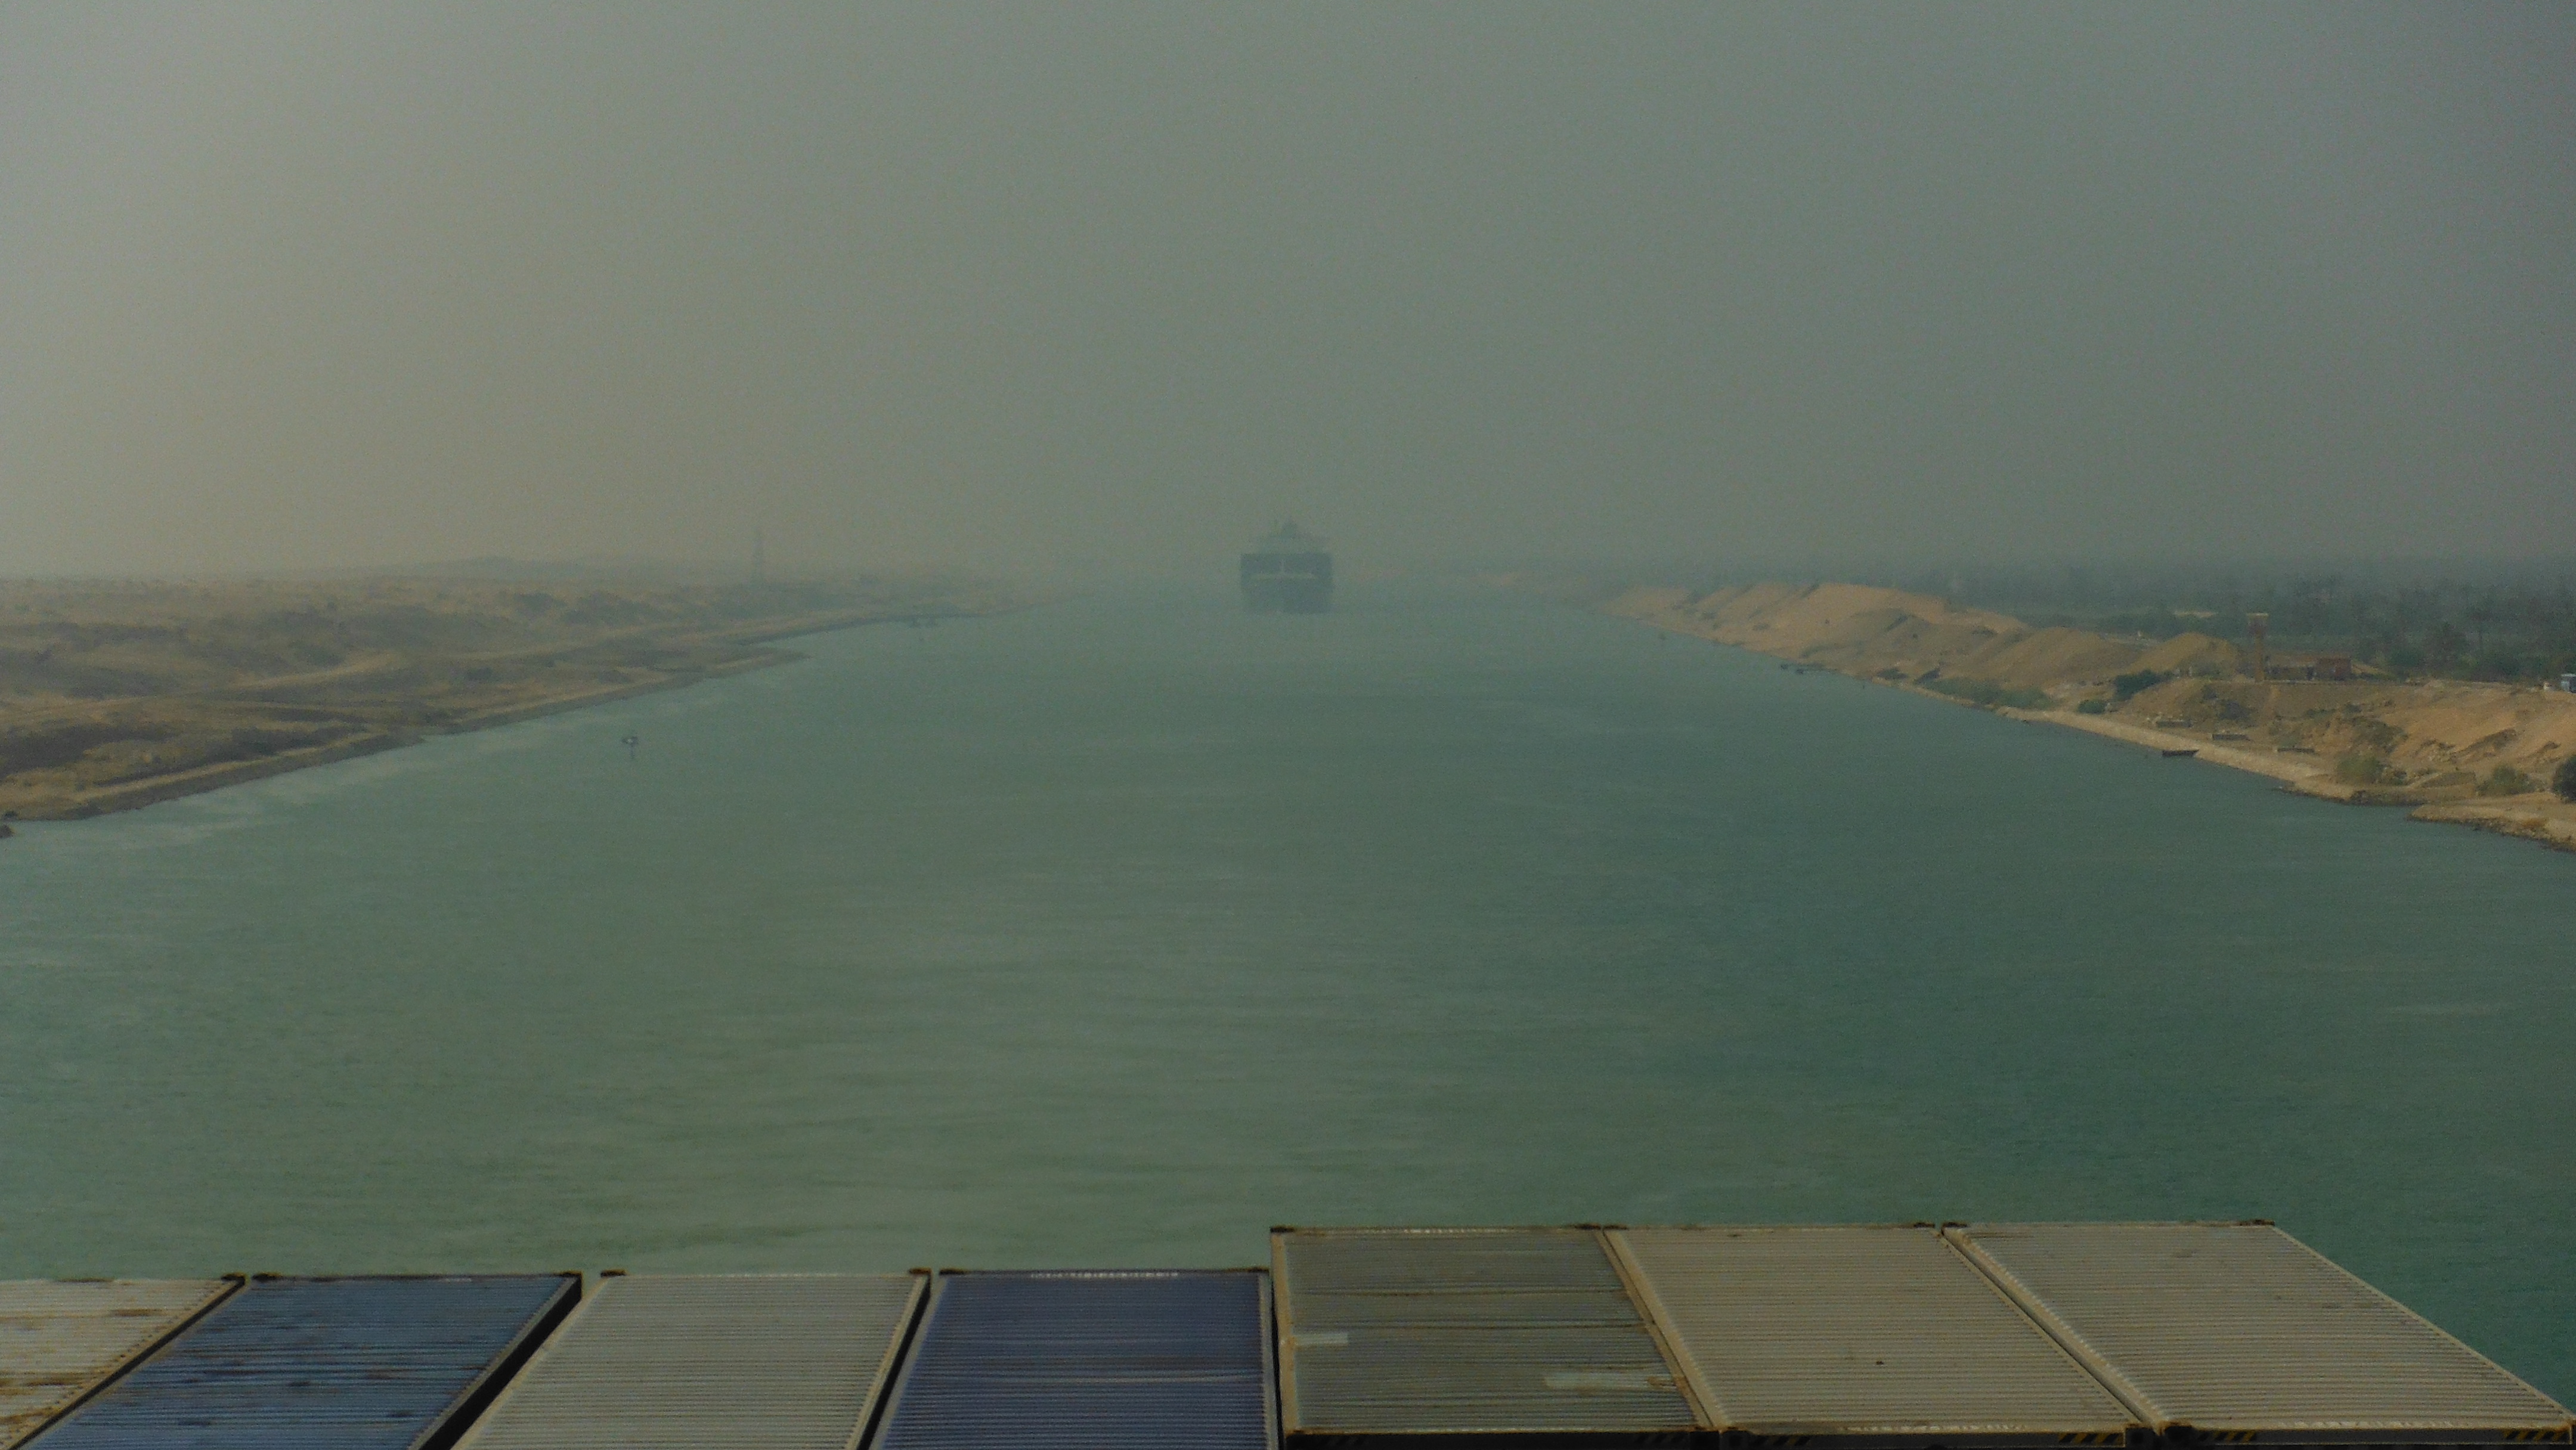 Transiting the Suez Canal by MIDN Guettelin